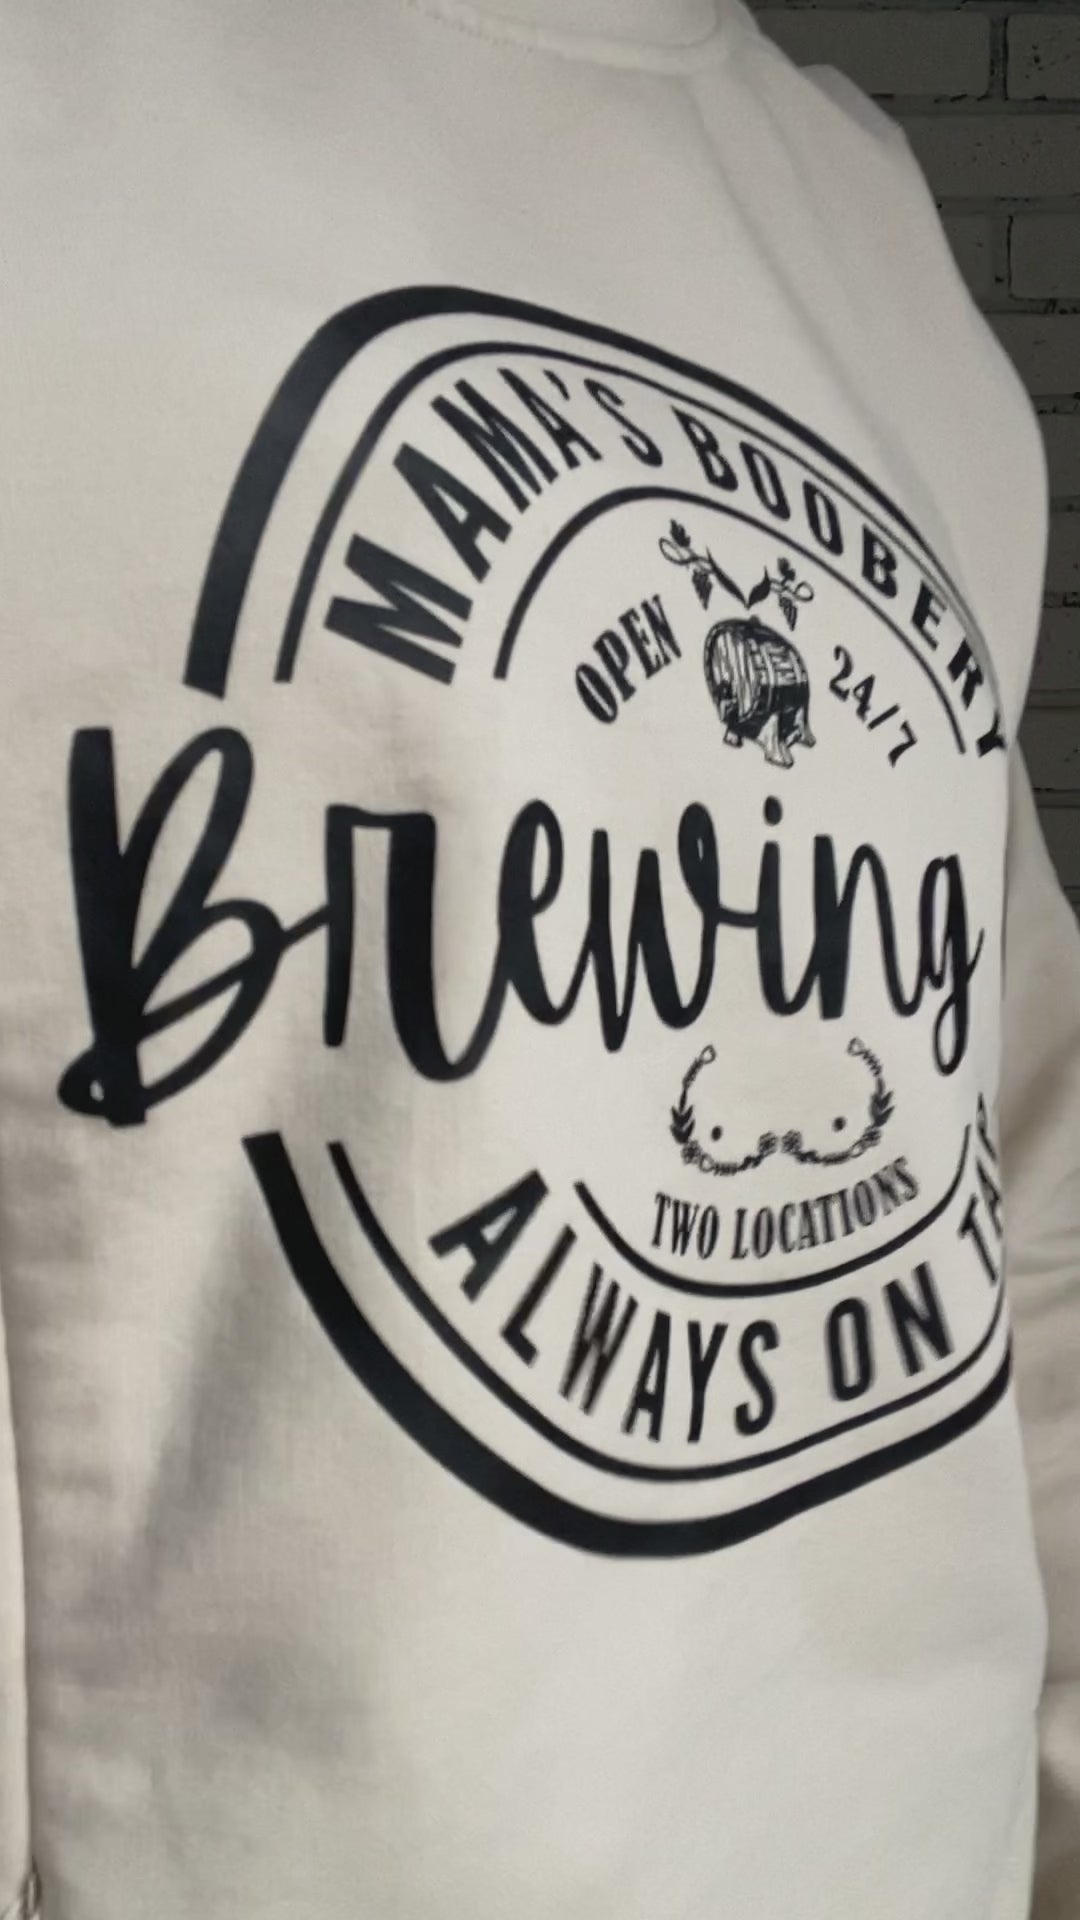 Women showing how to use the mama boobery brewing co always on tap designed crewneck sweatshirt that is breastfeeding and pumping friendly with two zippers on either side that open with the zipper on the bottom.